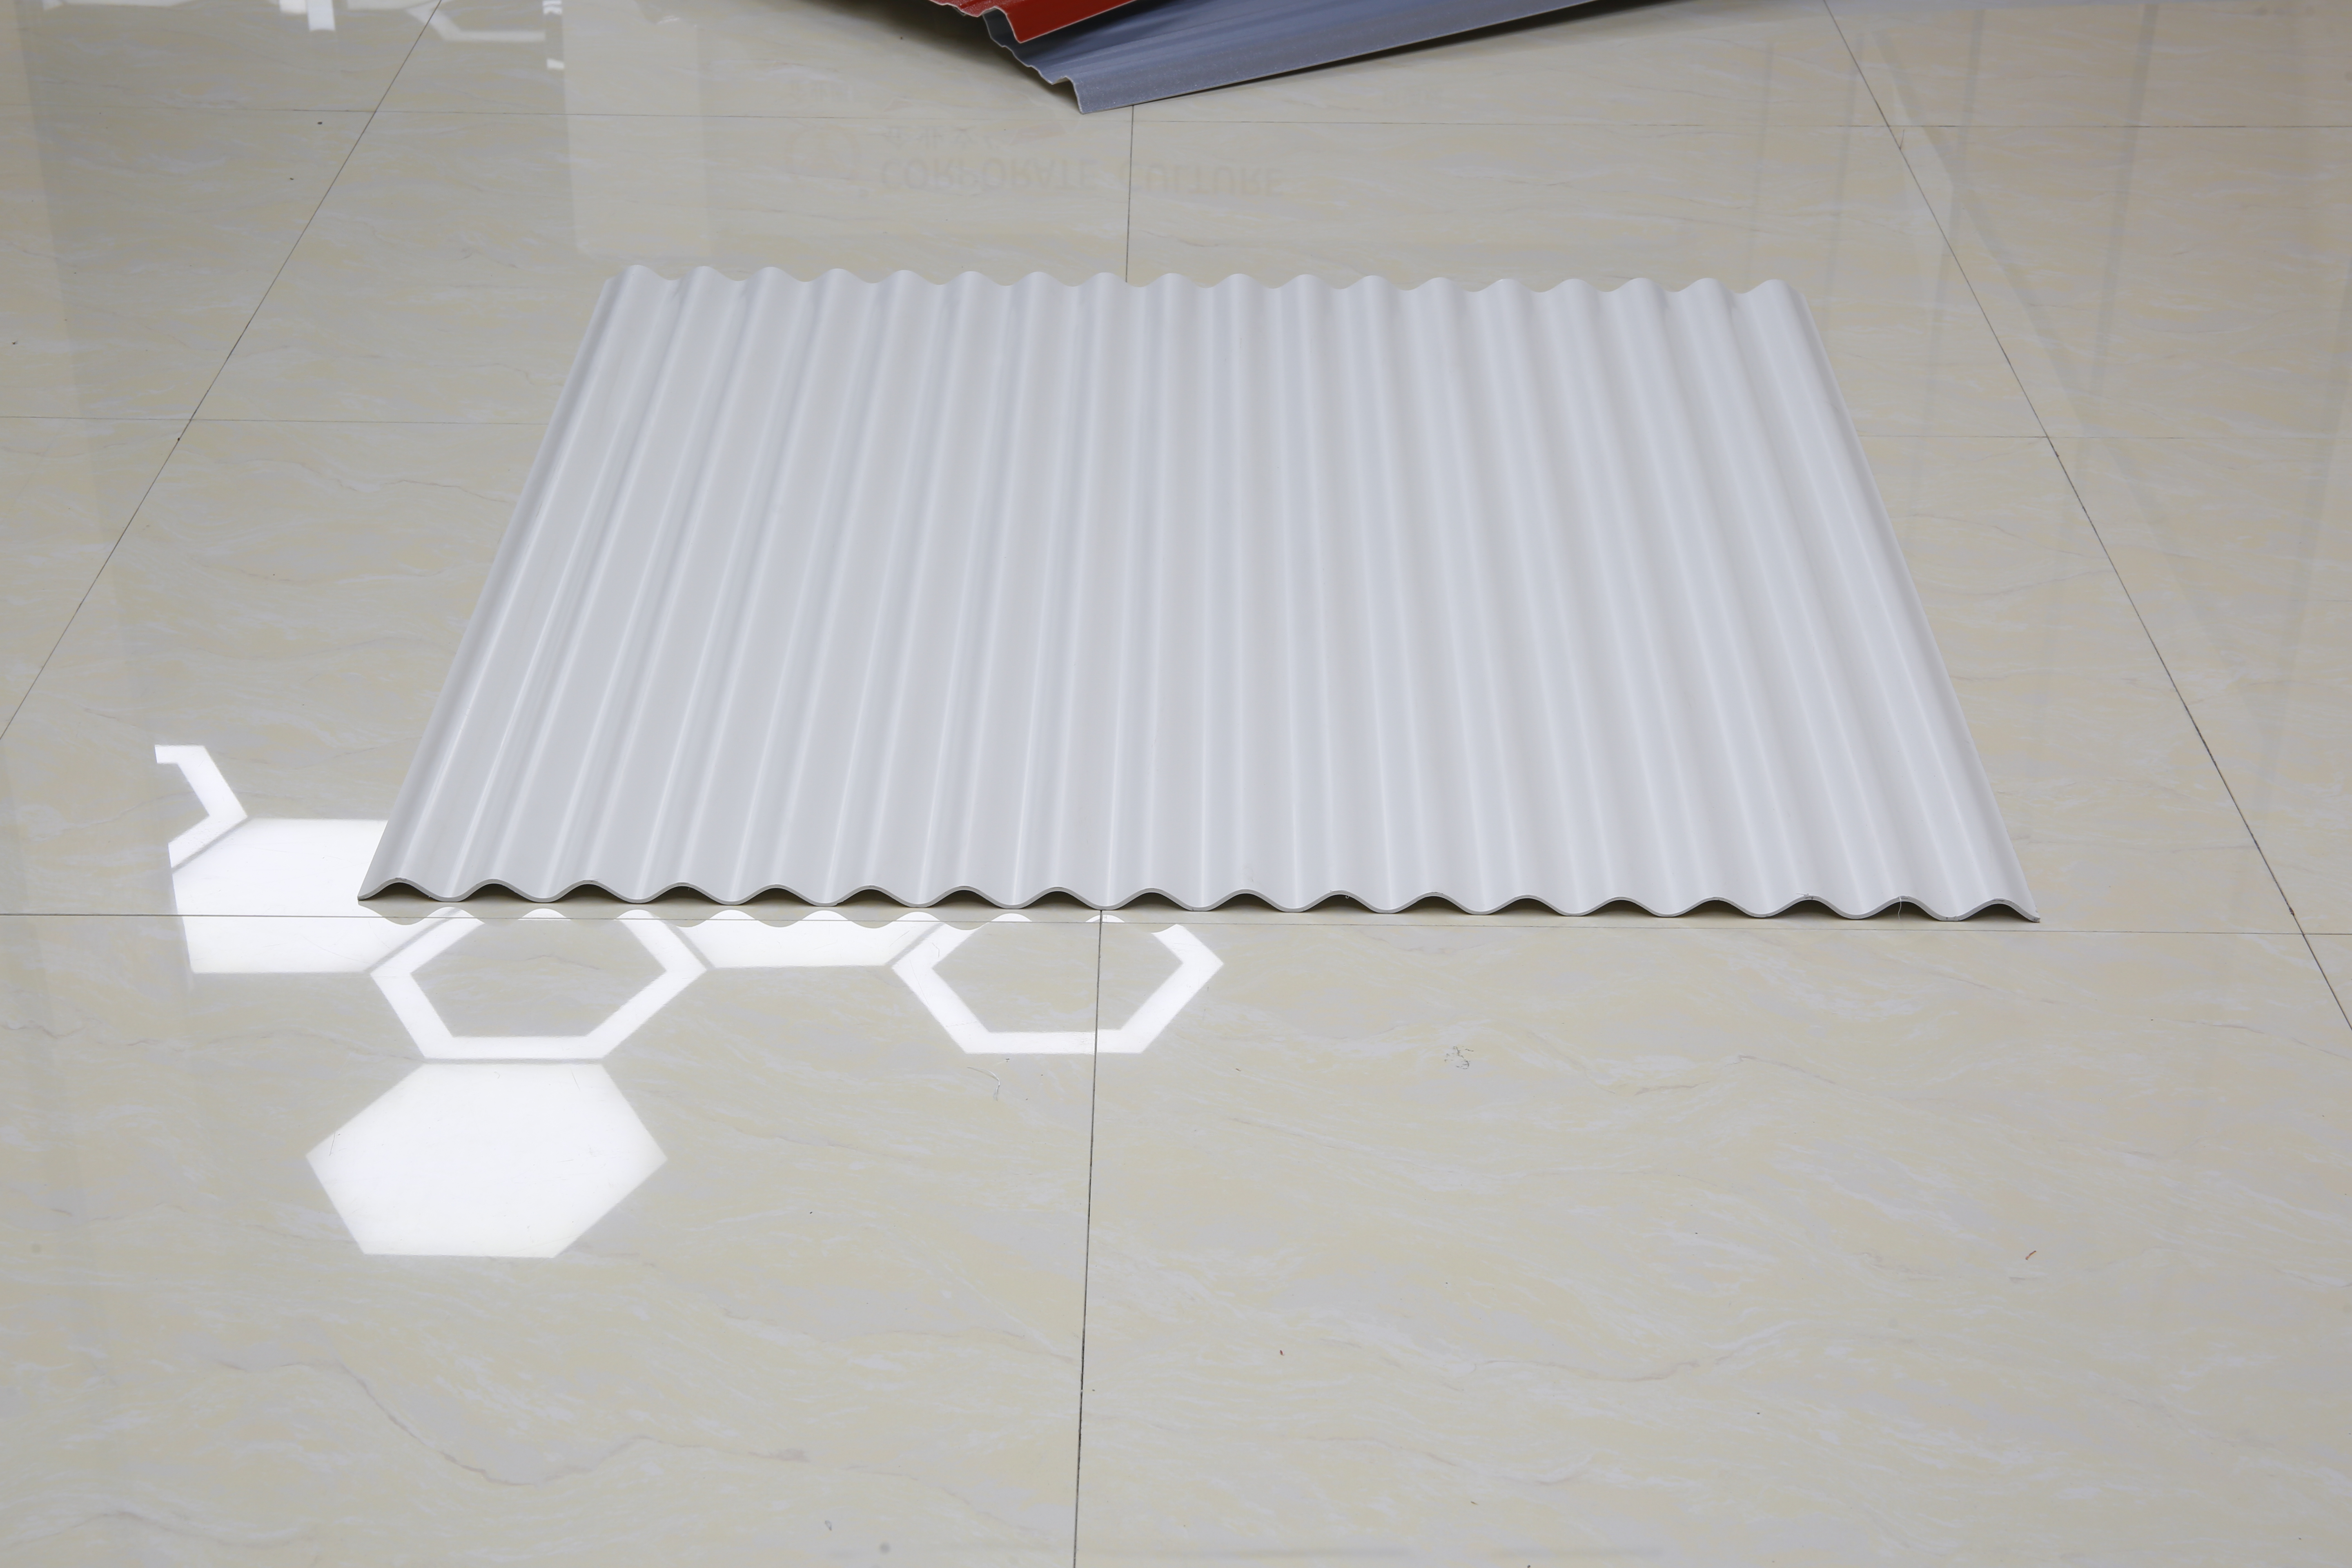 Hot sale good sound proof wave pvc plastic roof tile asa upvc roof sheet for wall cladding